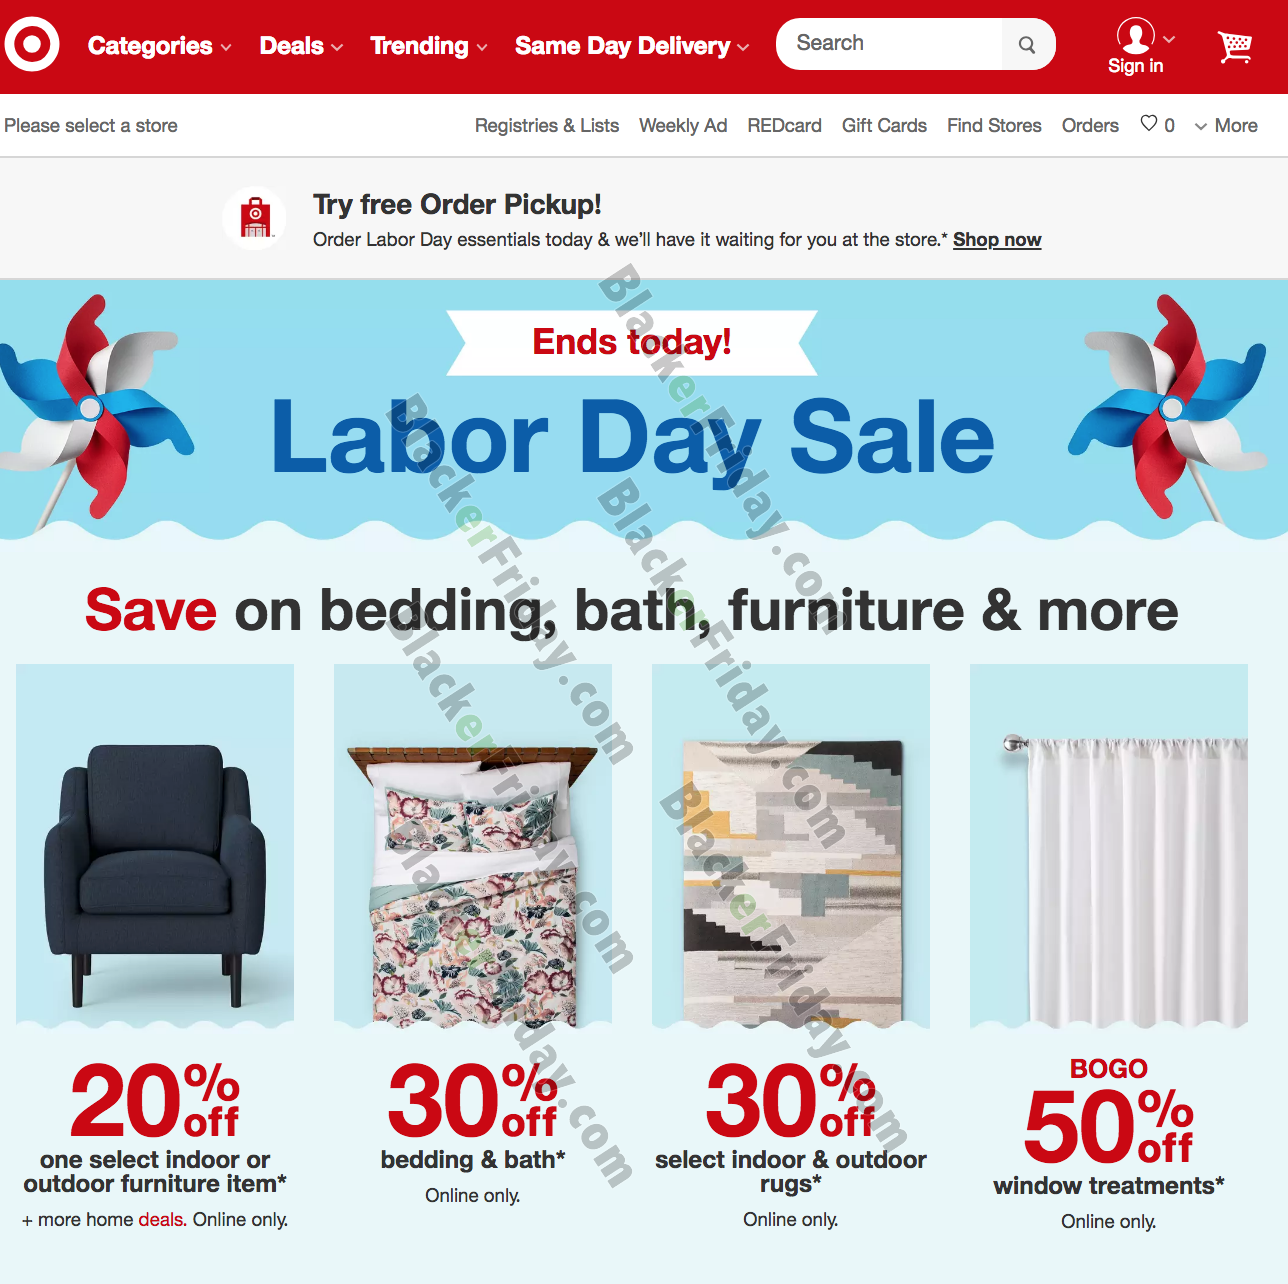 Target Labor Day Sale 2020 - What to Expect - Blacker Friday